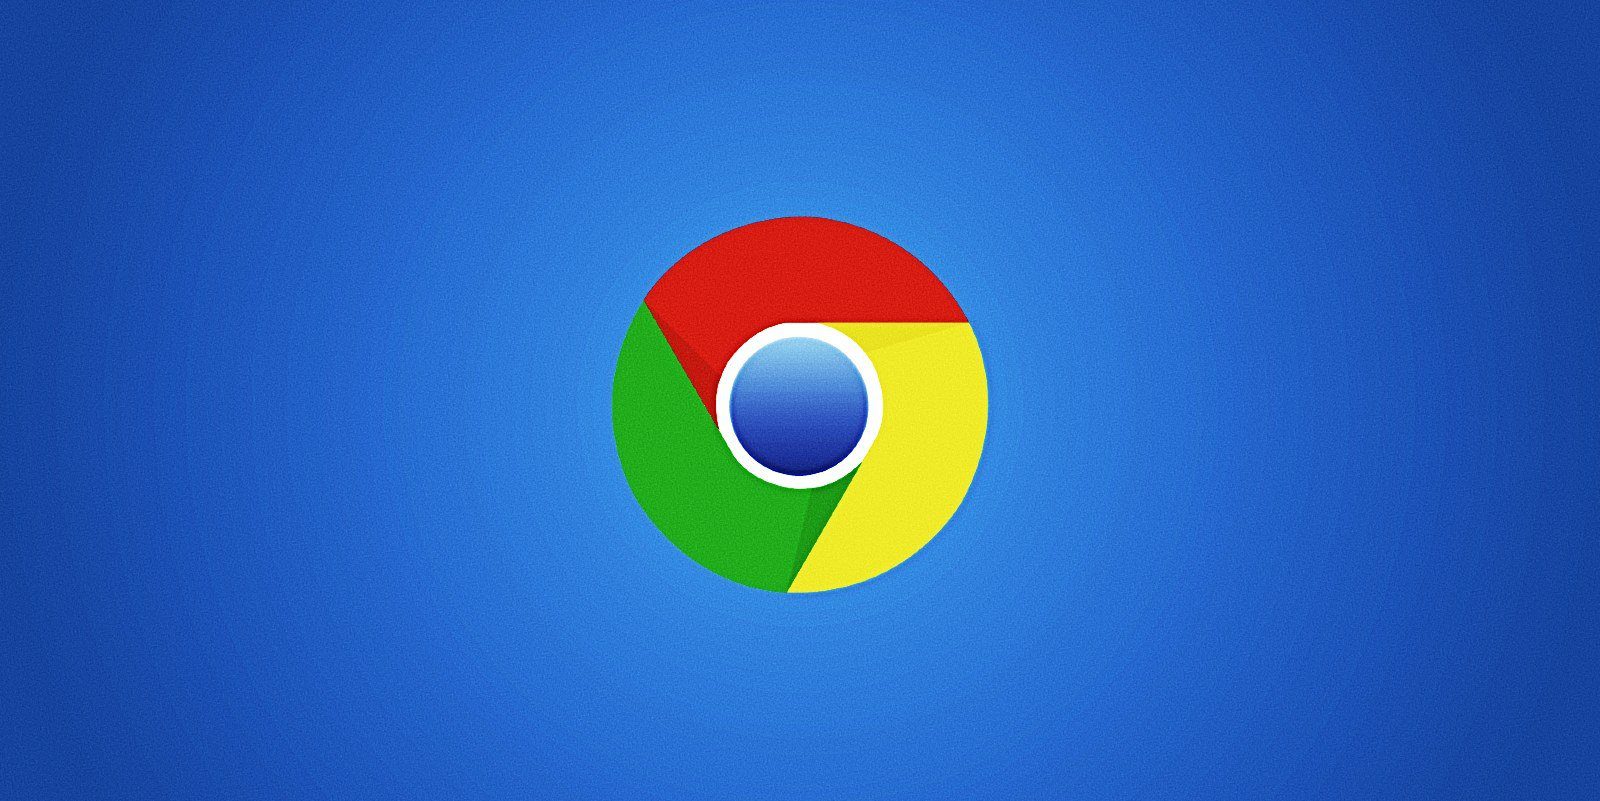 Google will remove secure website indicators in Chrome 117 – Source: www.bleepingcomputer.com